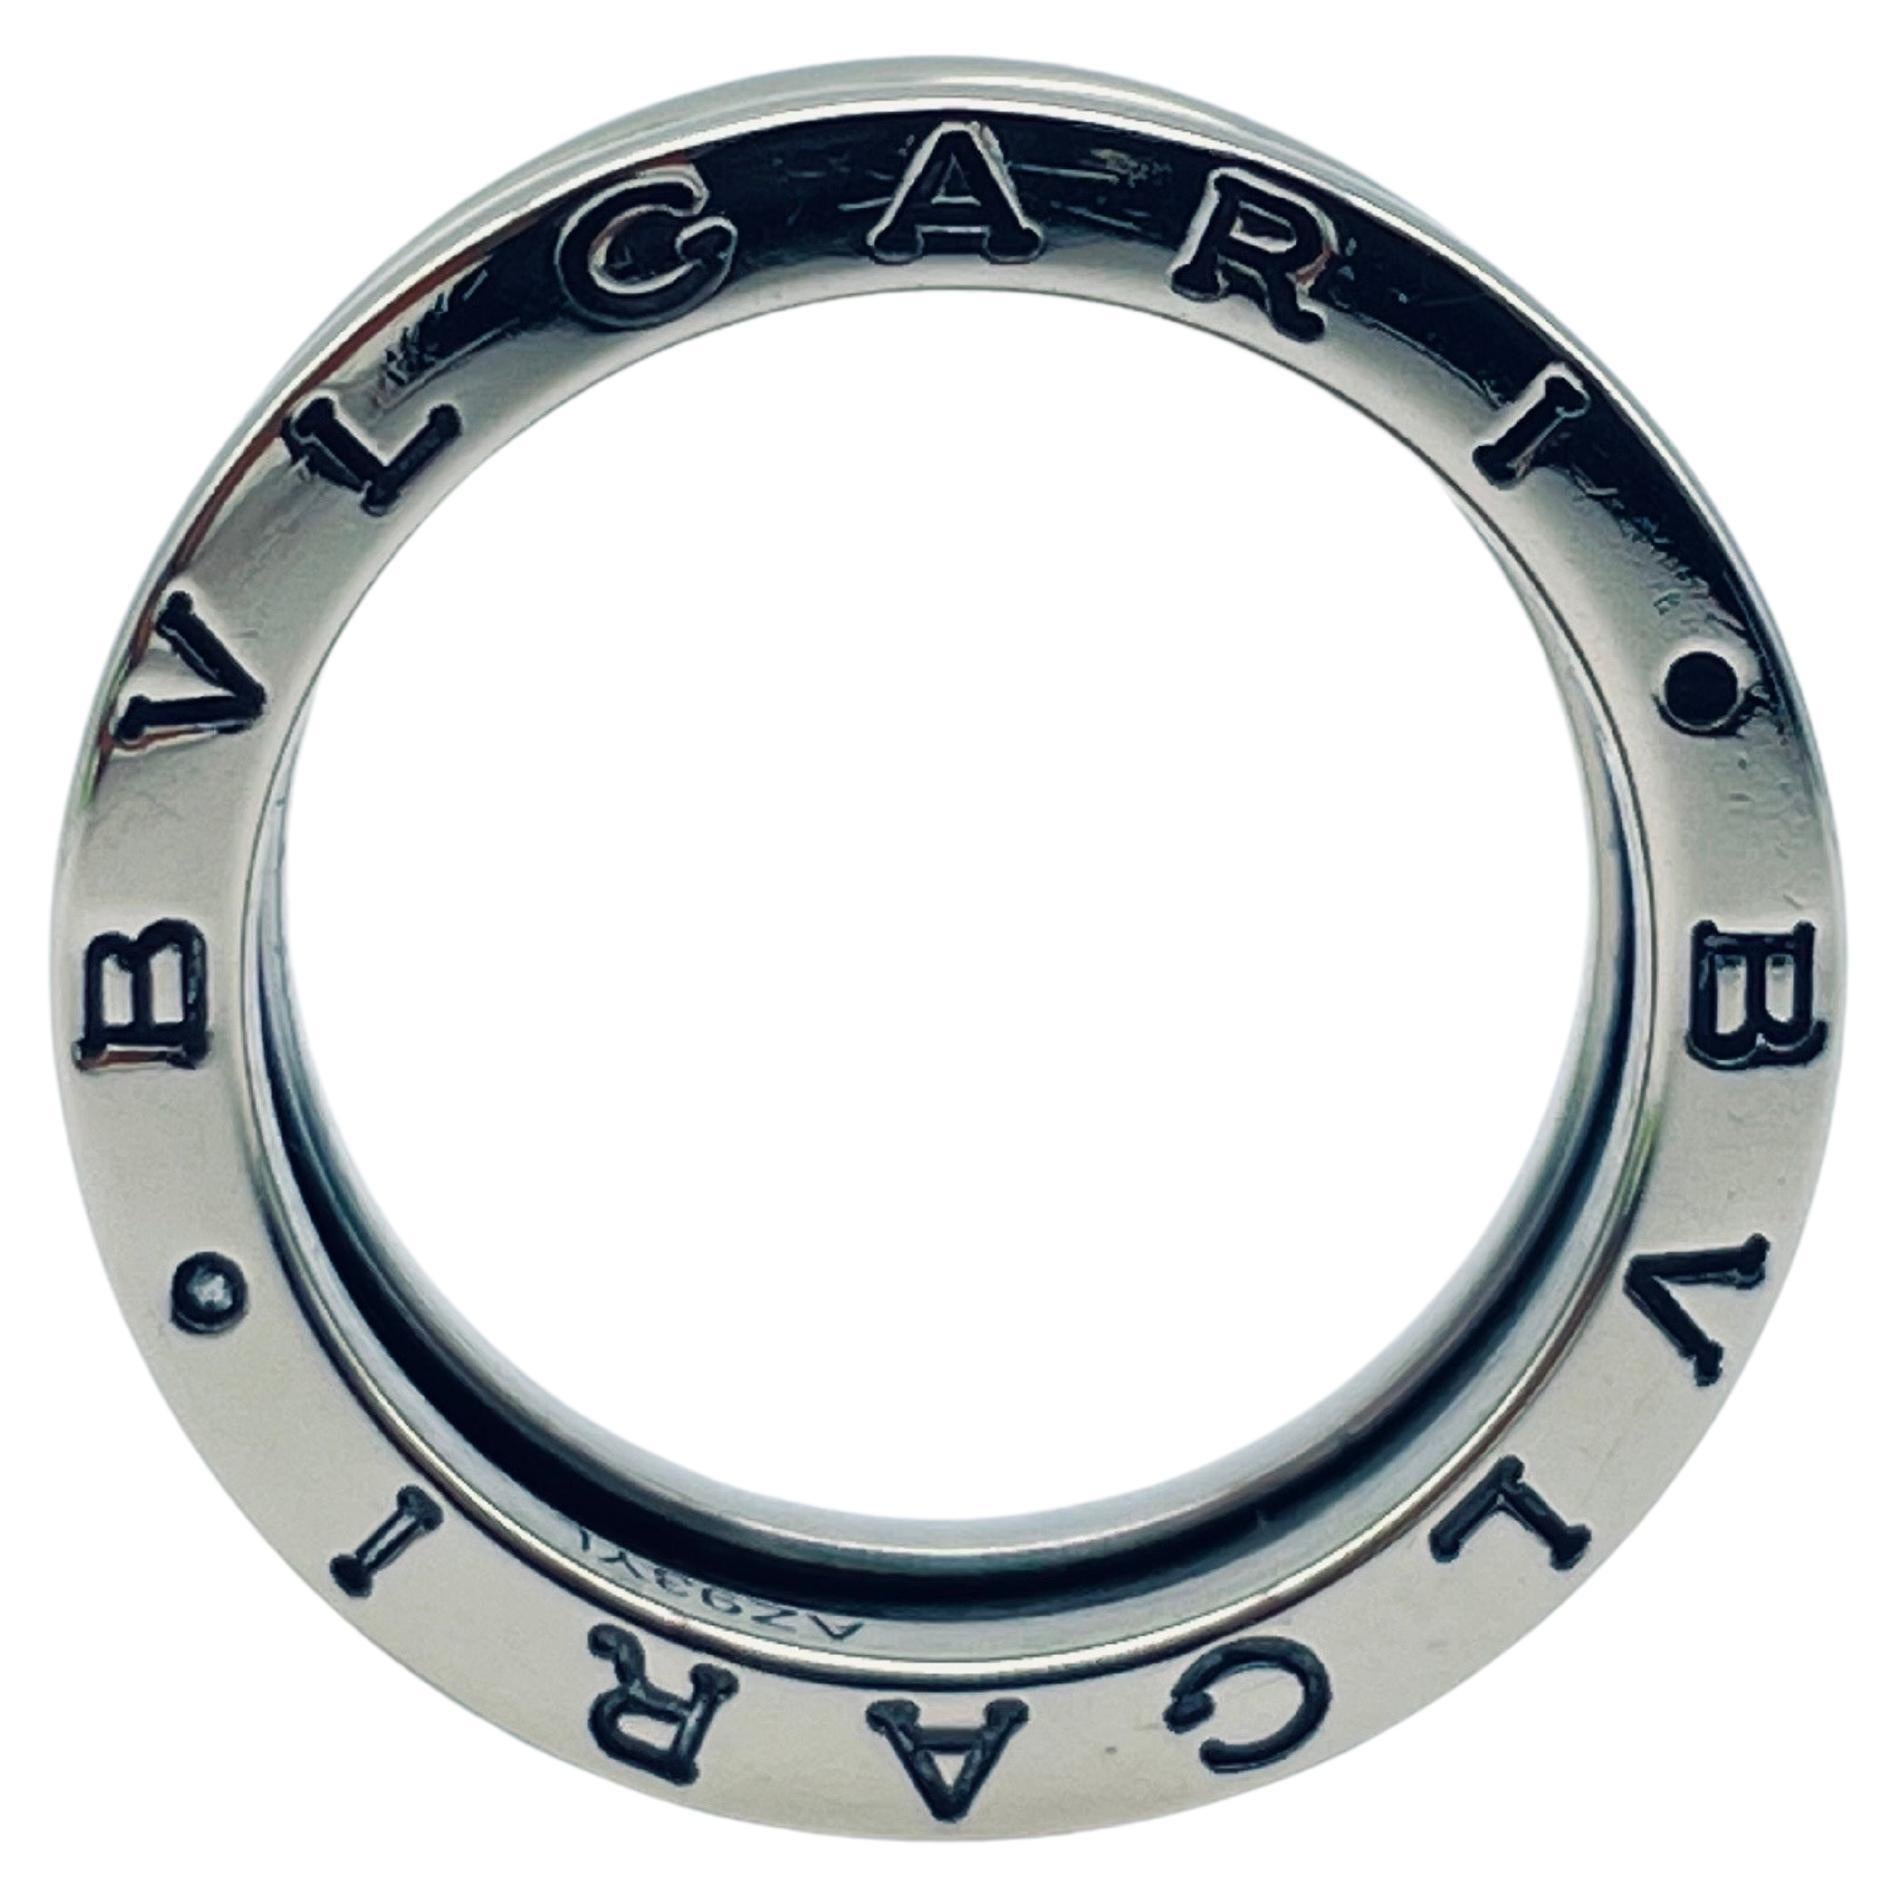 Bulgari B Zero Band Ring in 18k White Gold In Good Condition For Sale In Berlin, BE